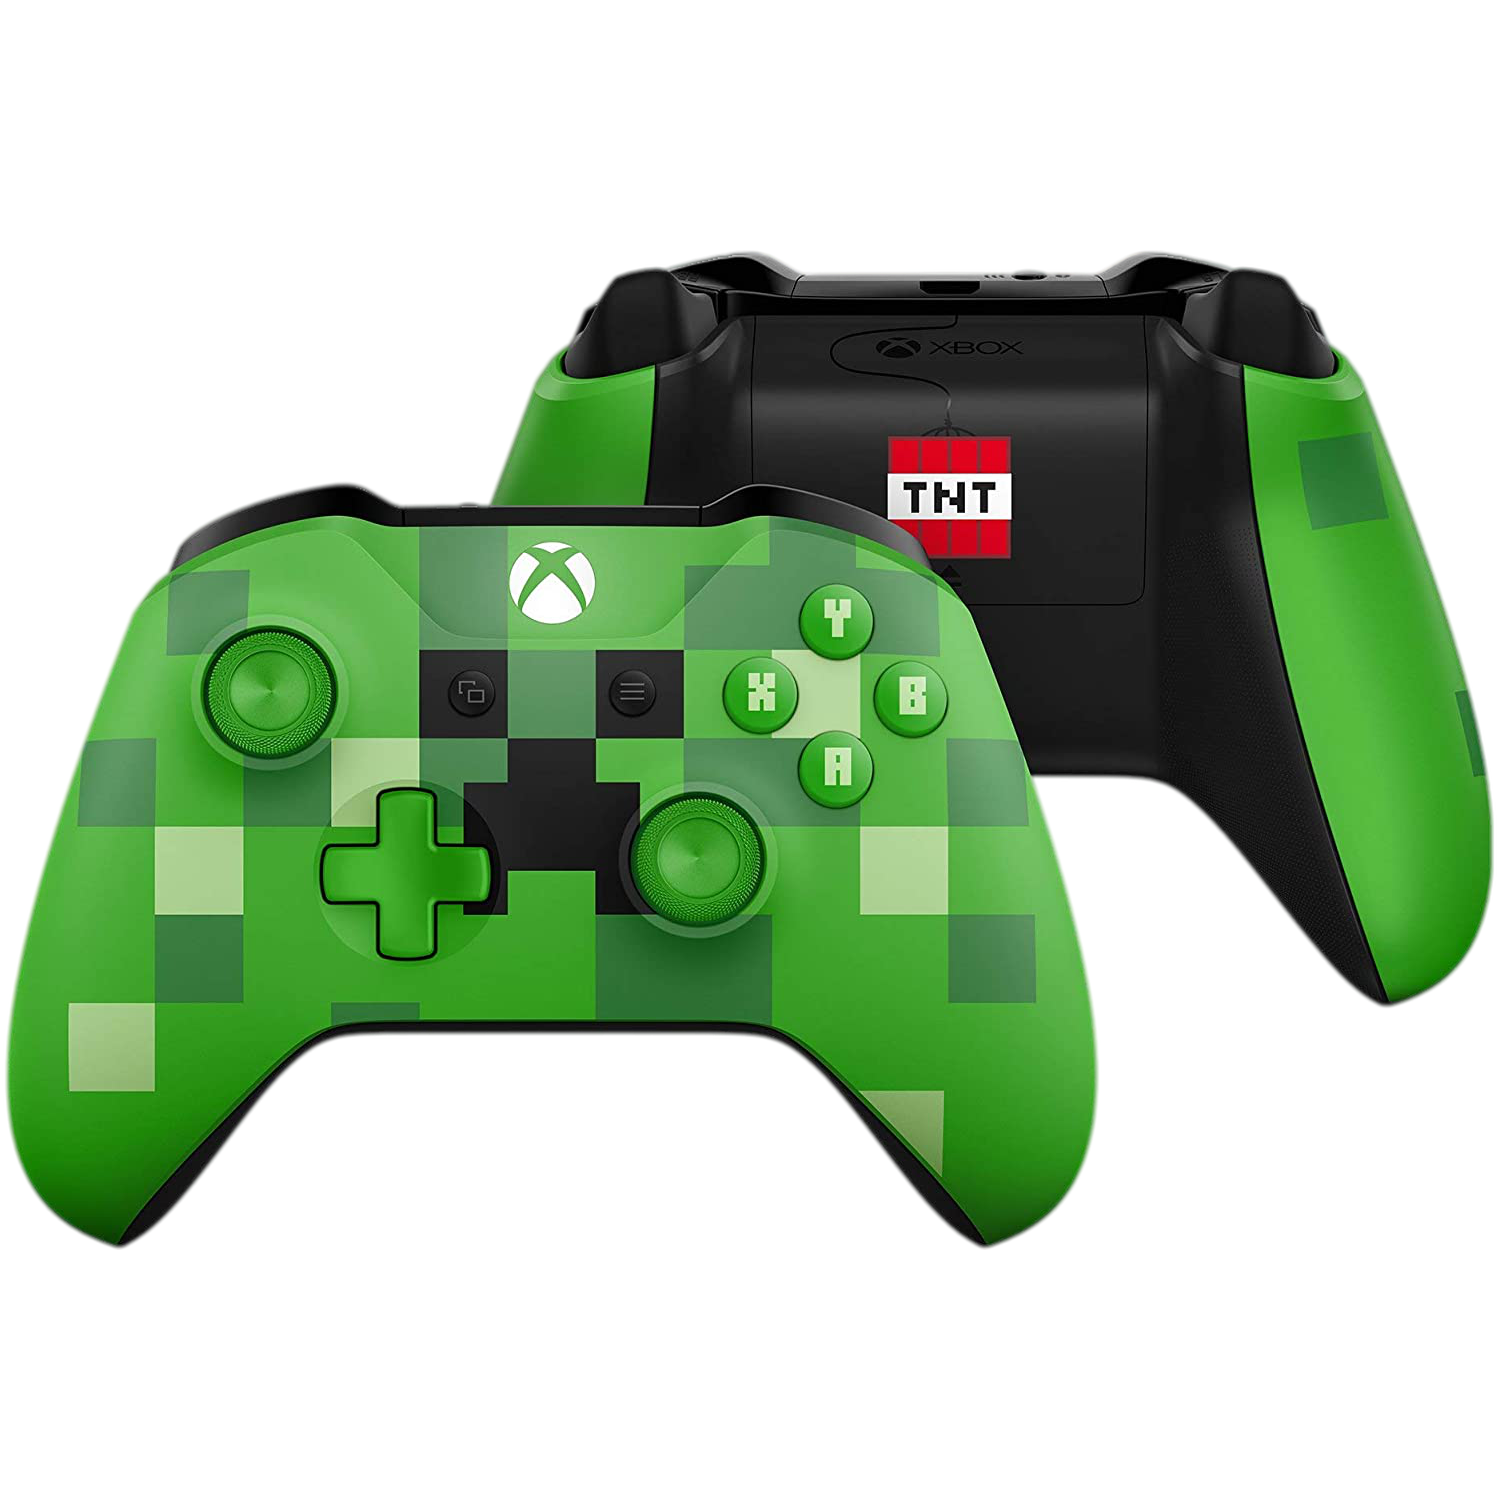 Microsoft-Official-Xbox-Controller-Minecraft-Creeper-Limited-Edition-12-Months-Warranty